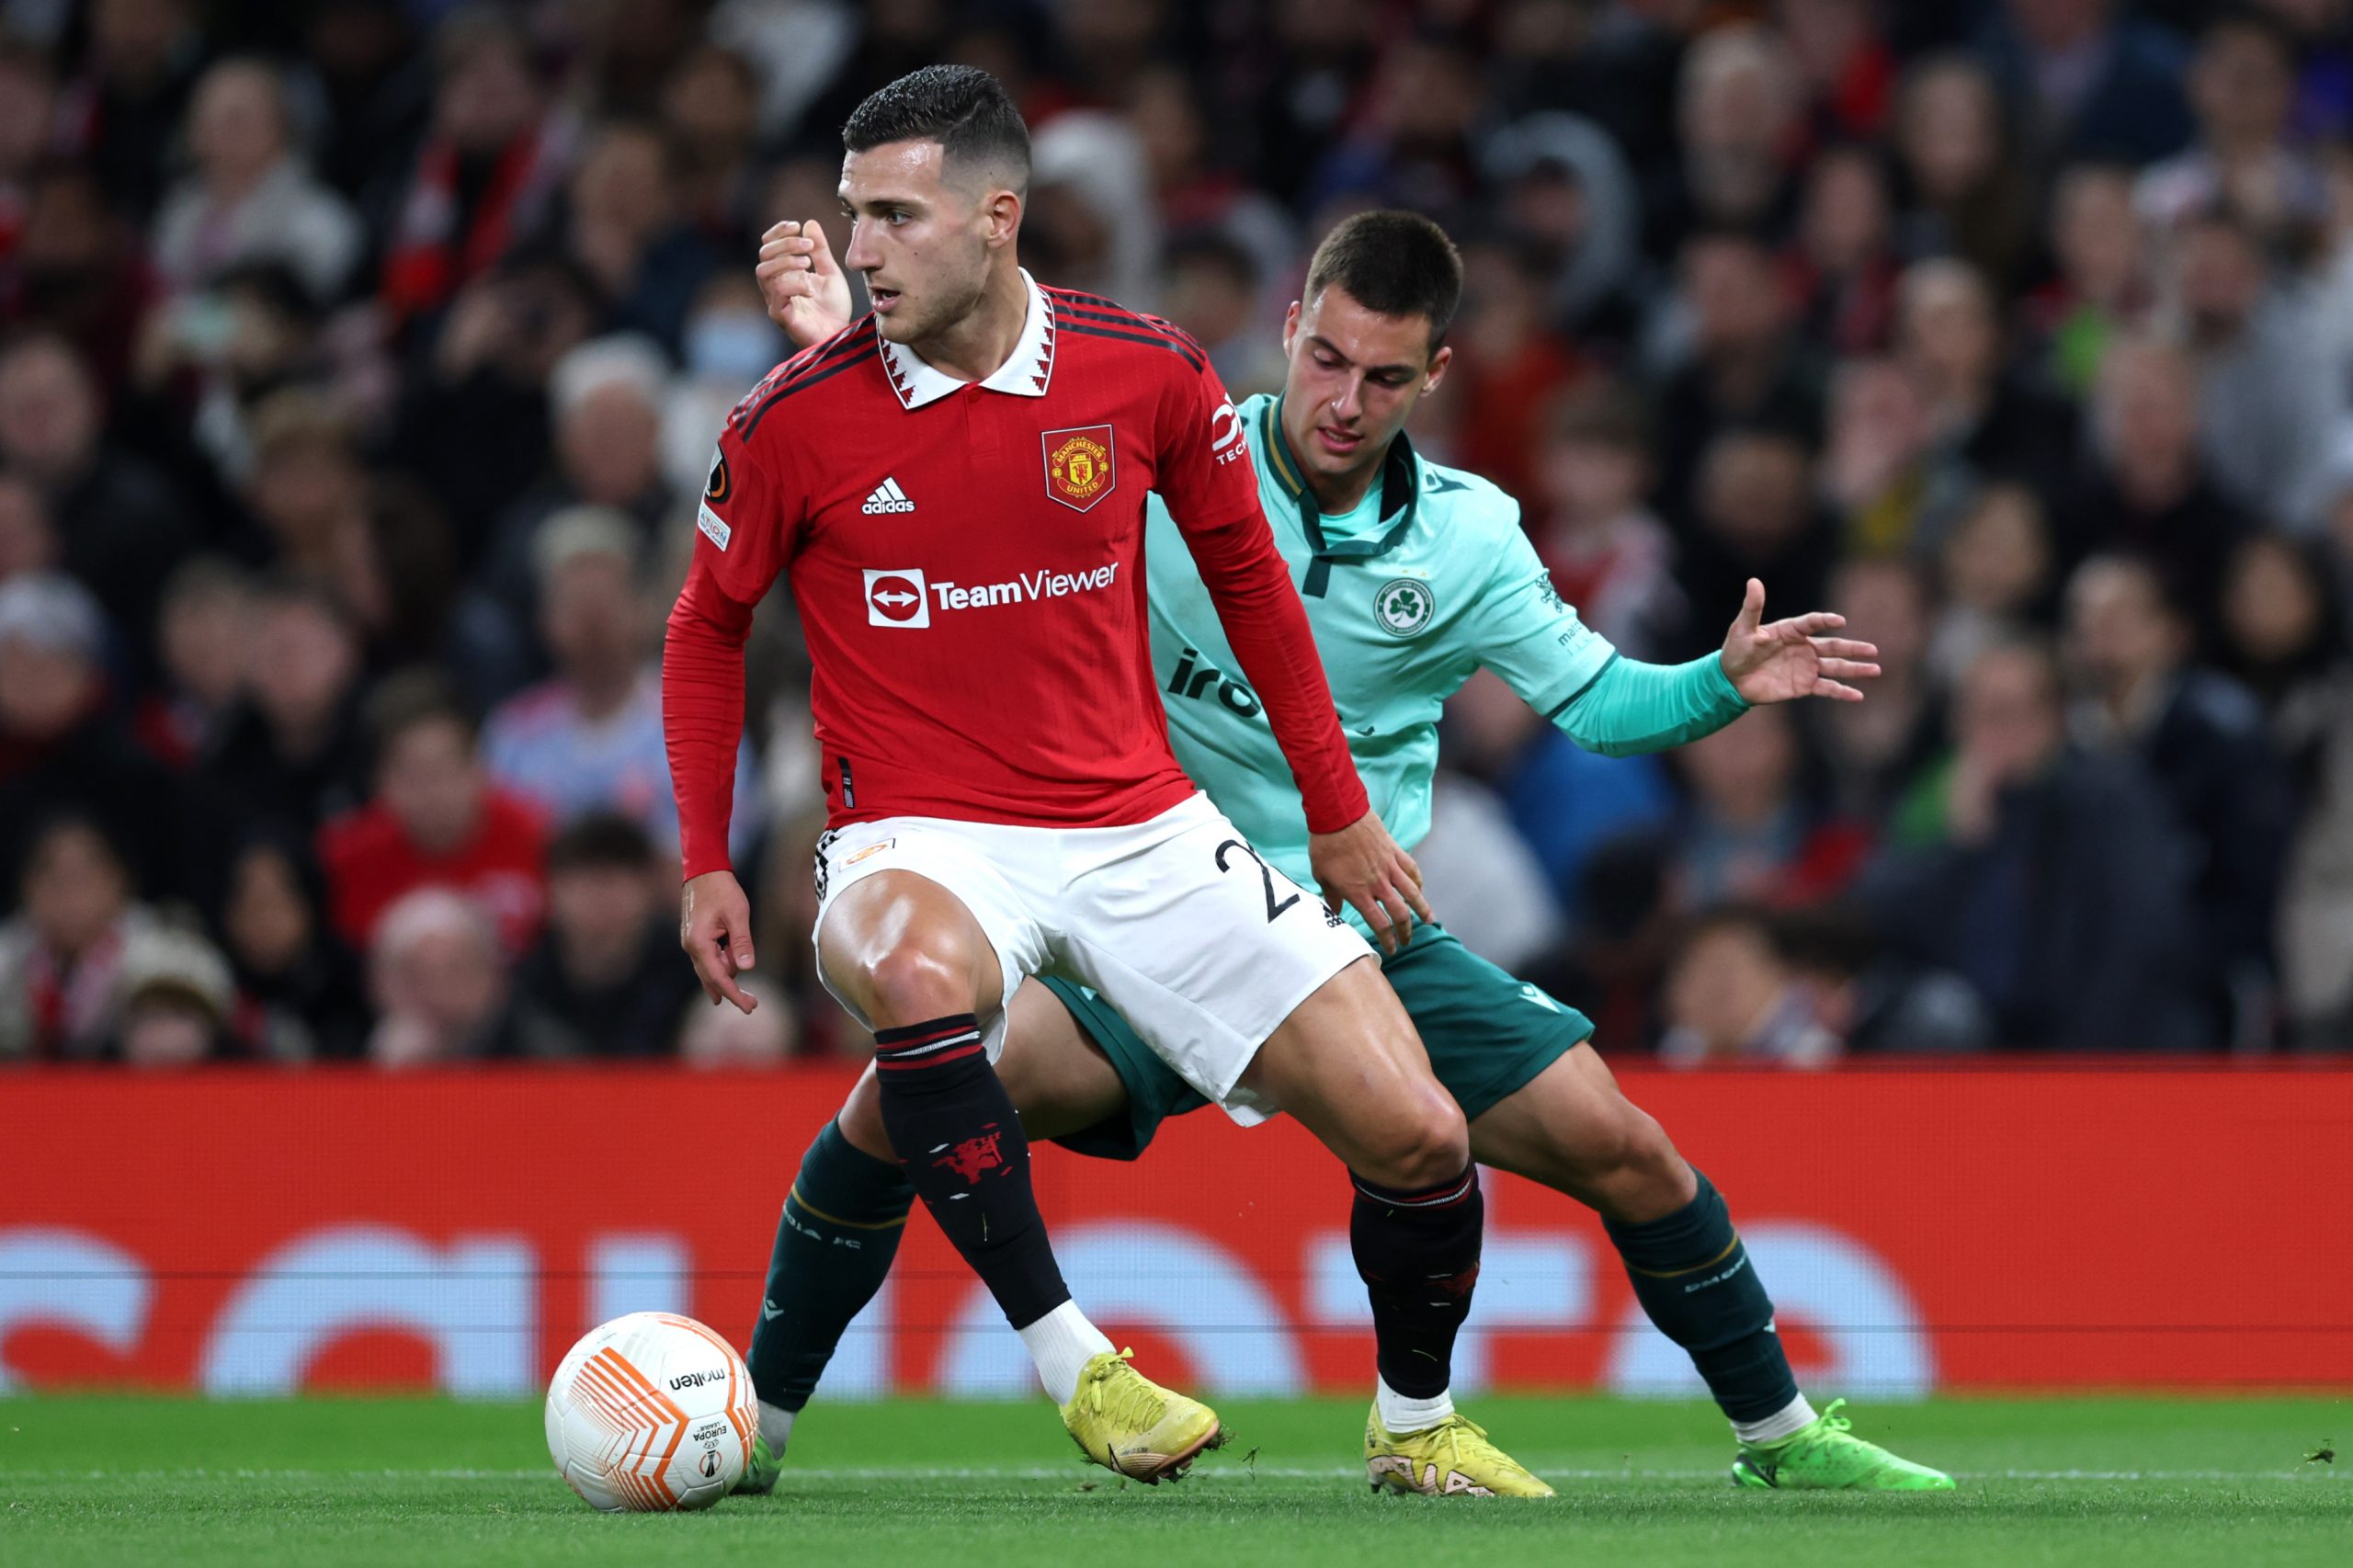 Diogo Dalot in action for Manchester United against Omonia. (Photo by Clive Brunskill/Getty Images)